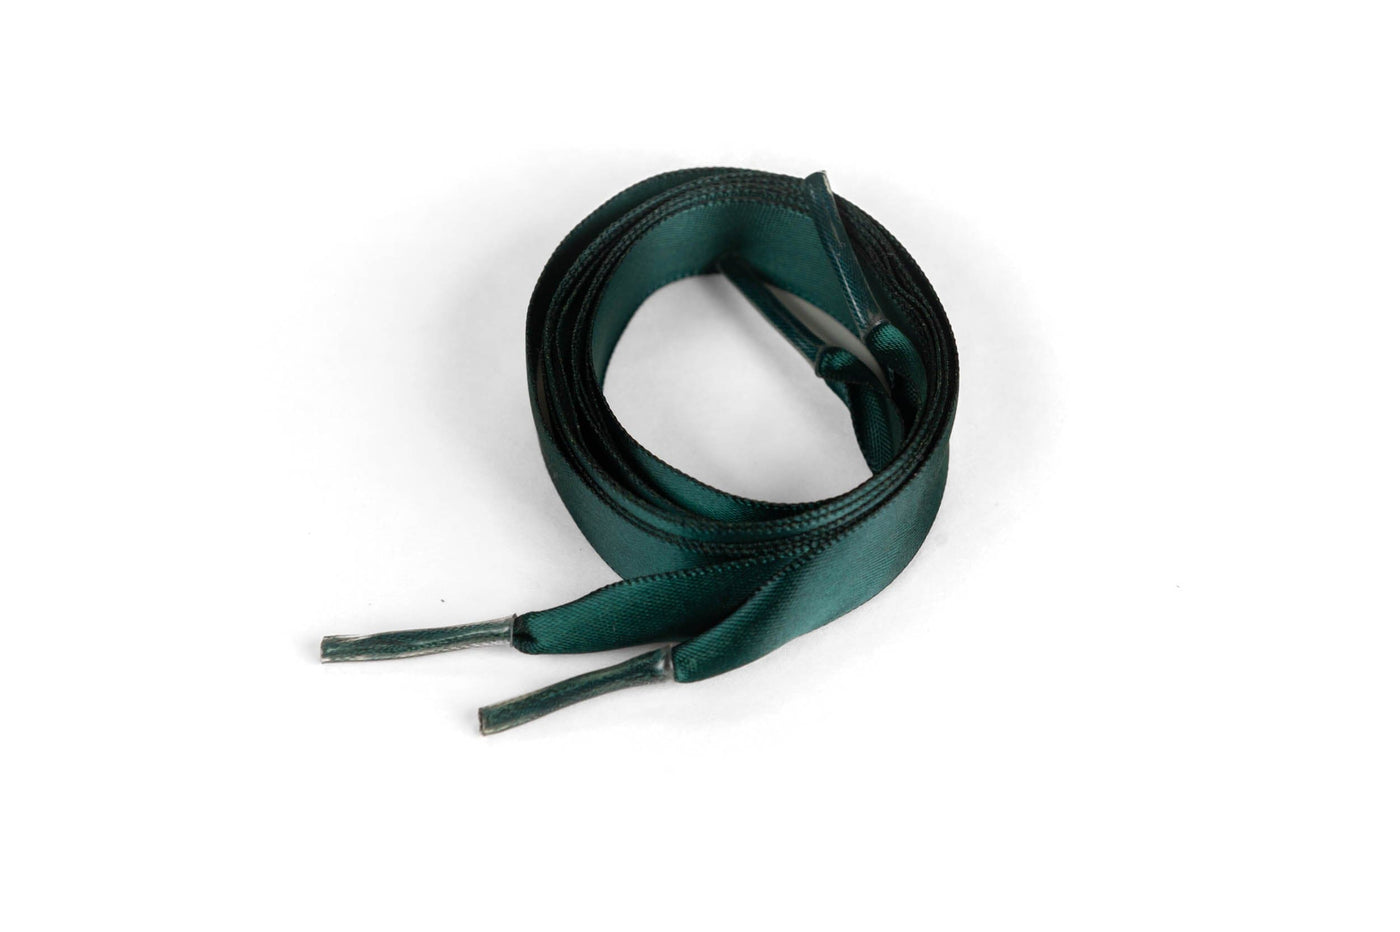 Satin Ribbon 5/8" Premium Quality Shoelaces - 63" Inch Length Teal